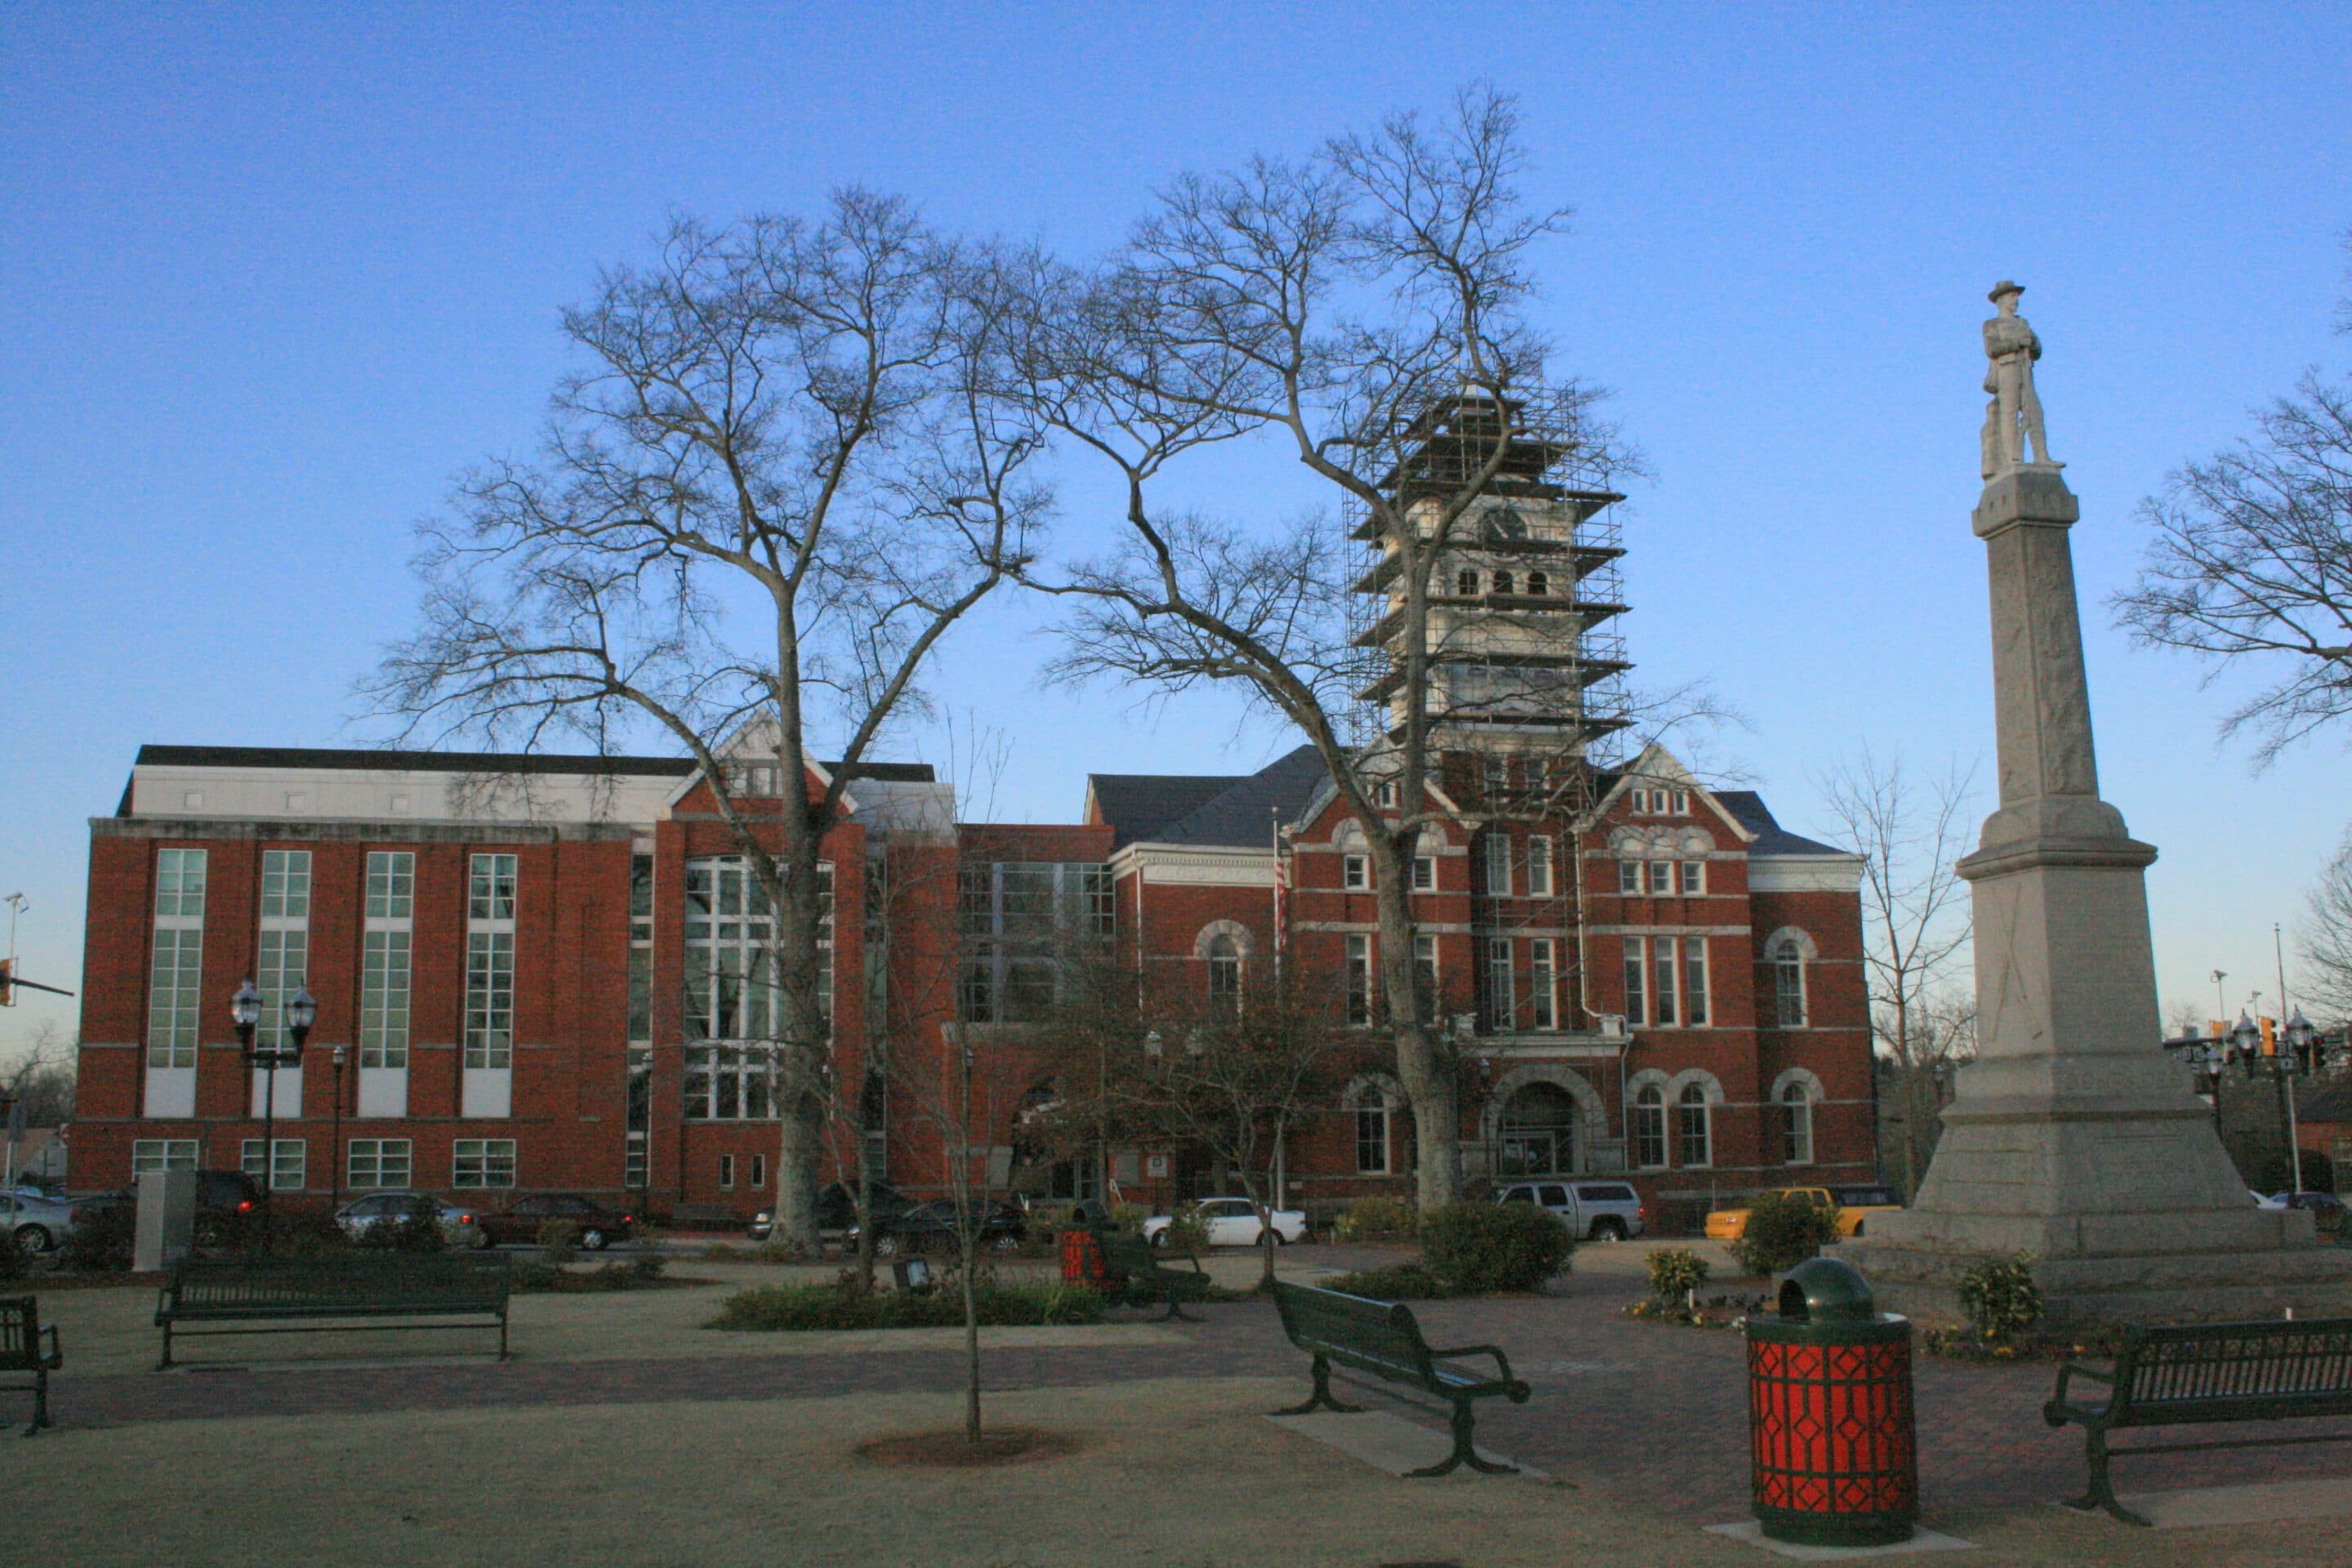 The McDonough Square in the Winter